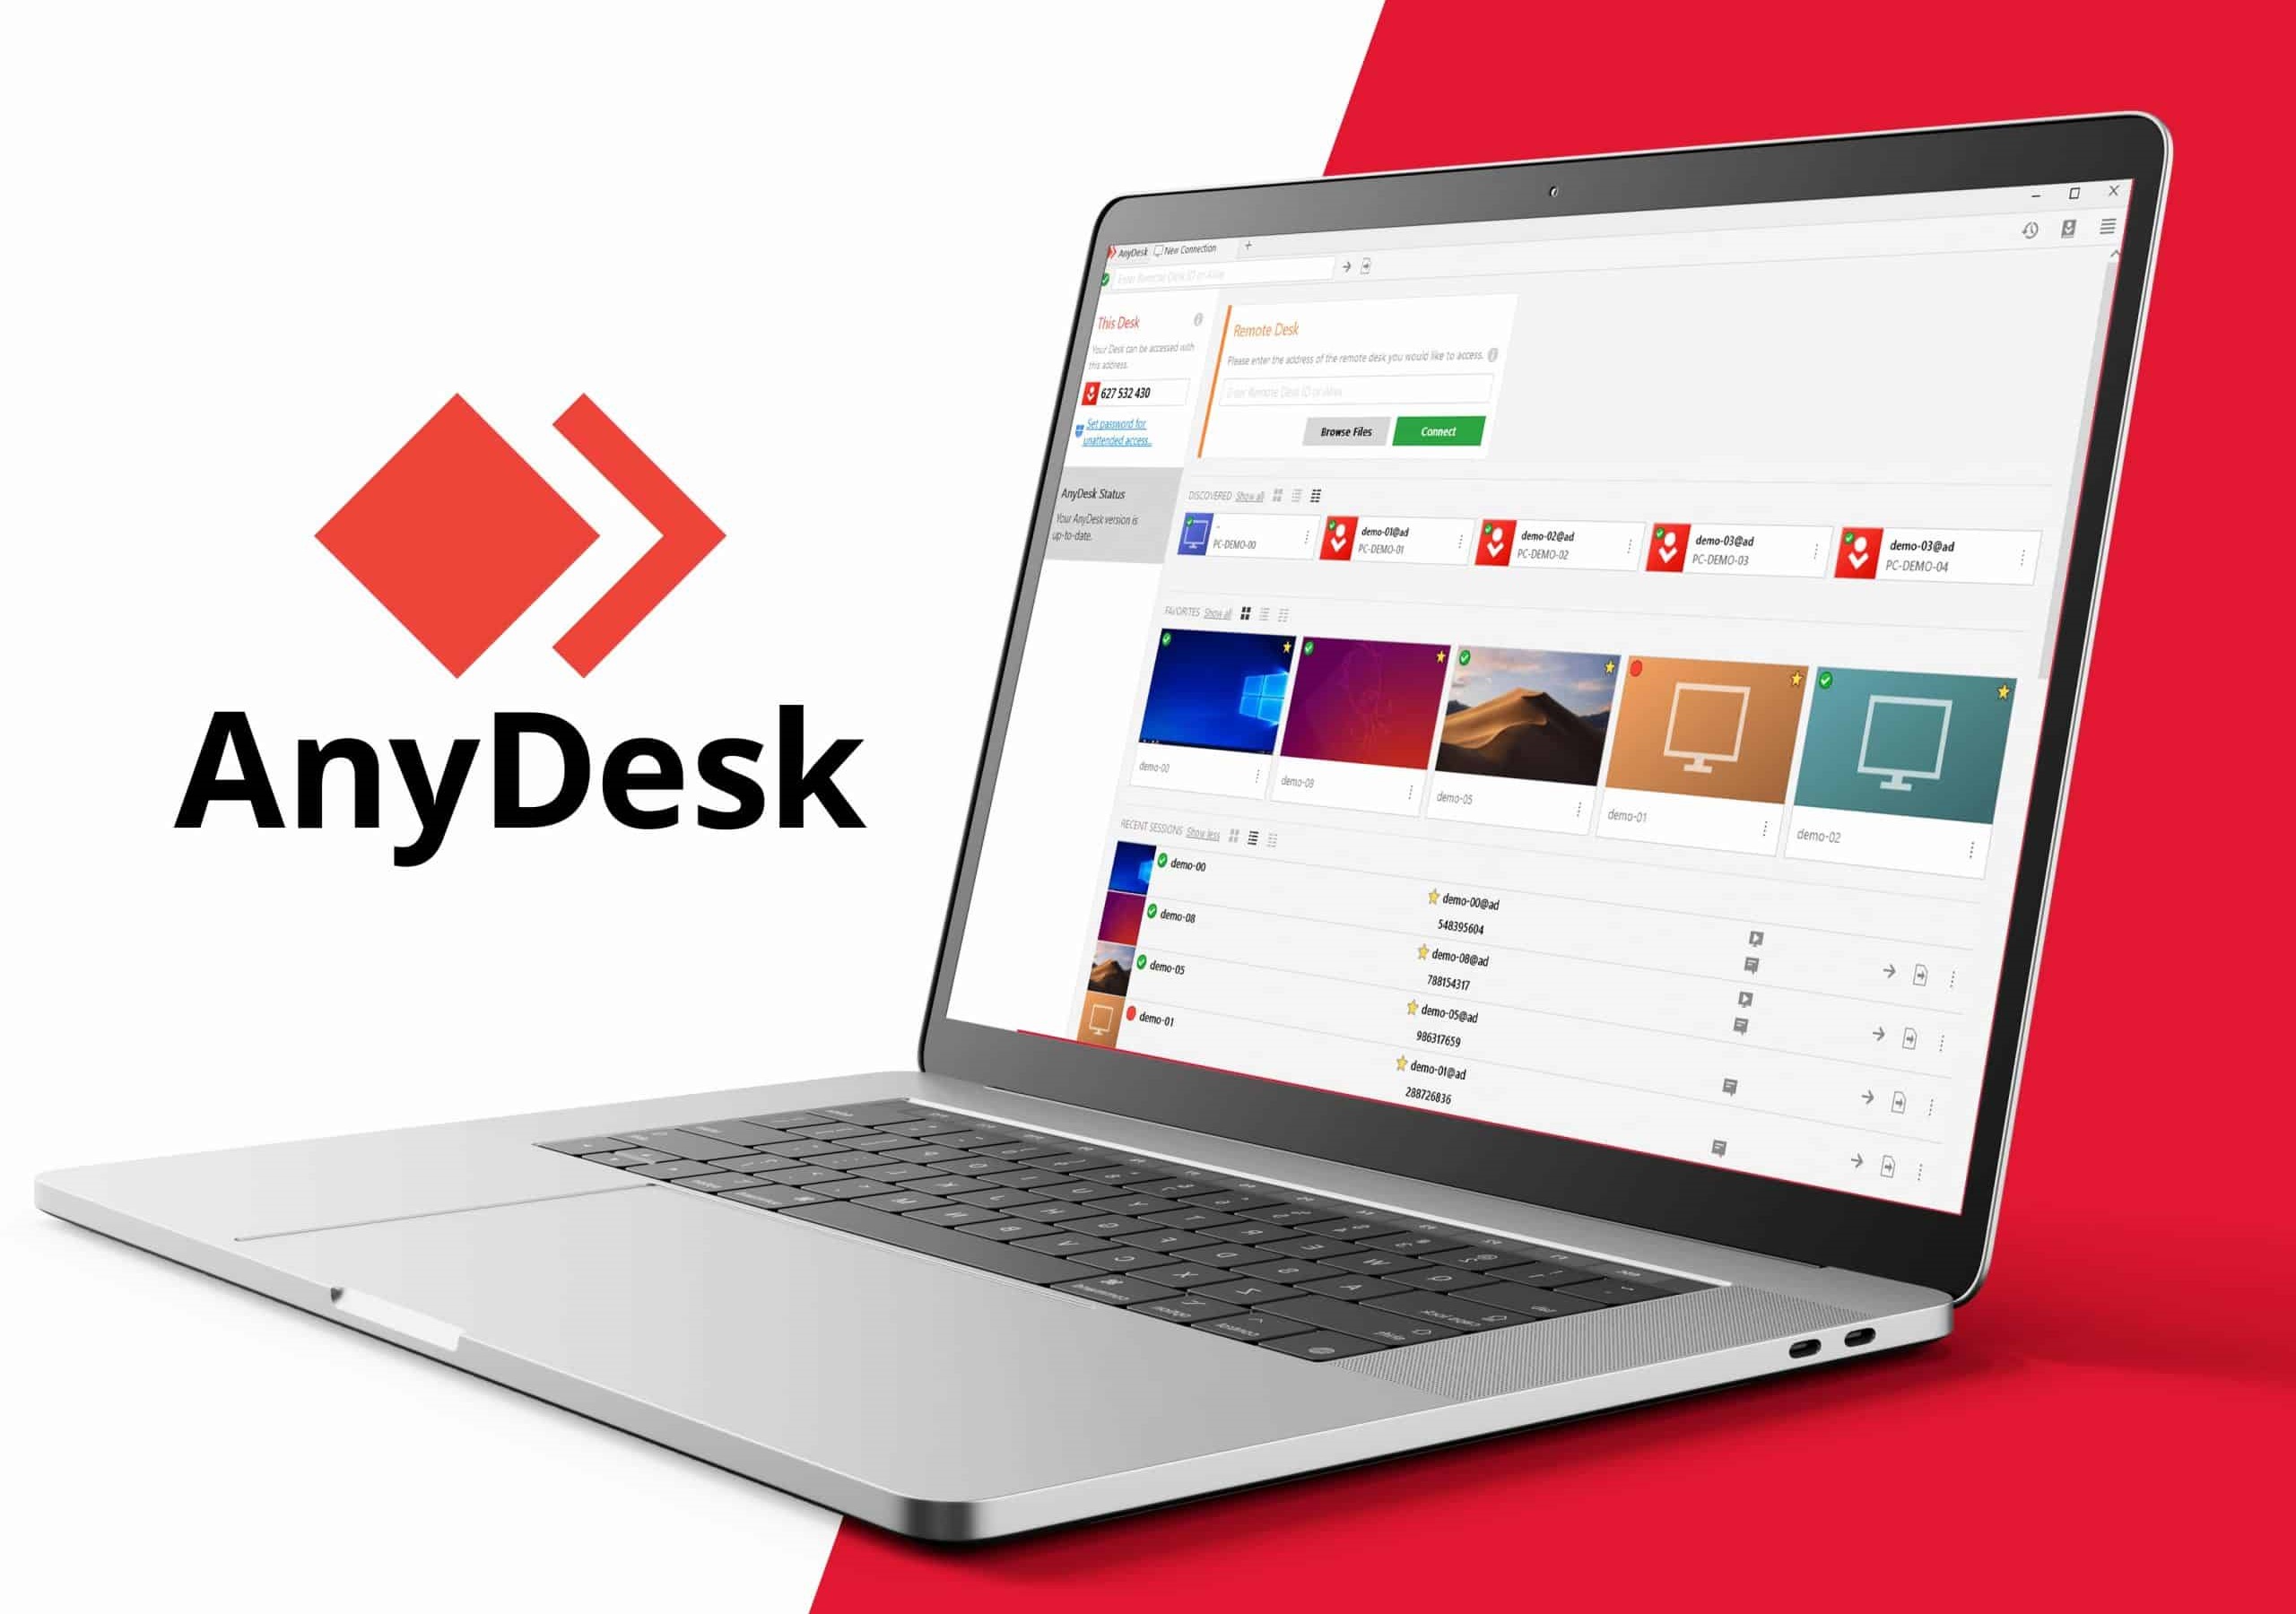 anydesk download pc windows 7